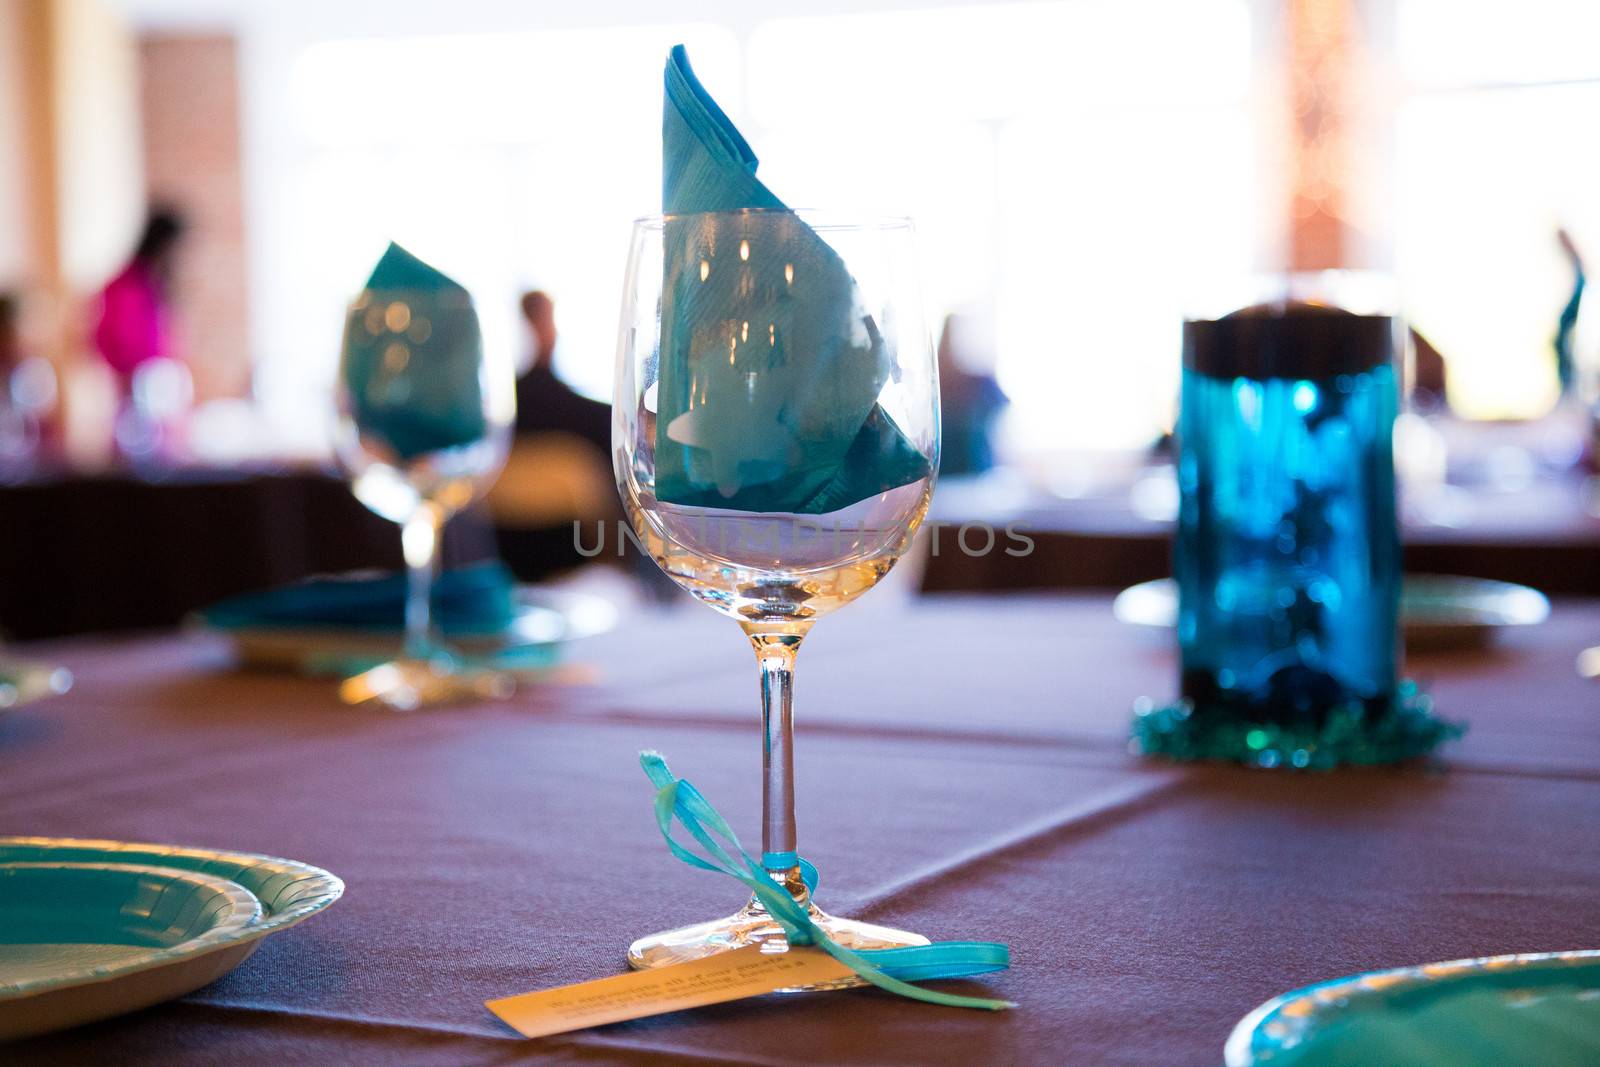 Wine glasses are setup as decor for this wedding reception.